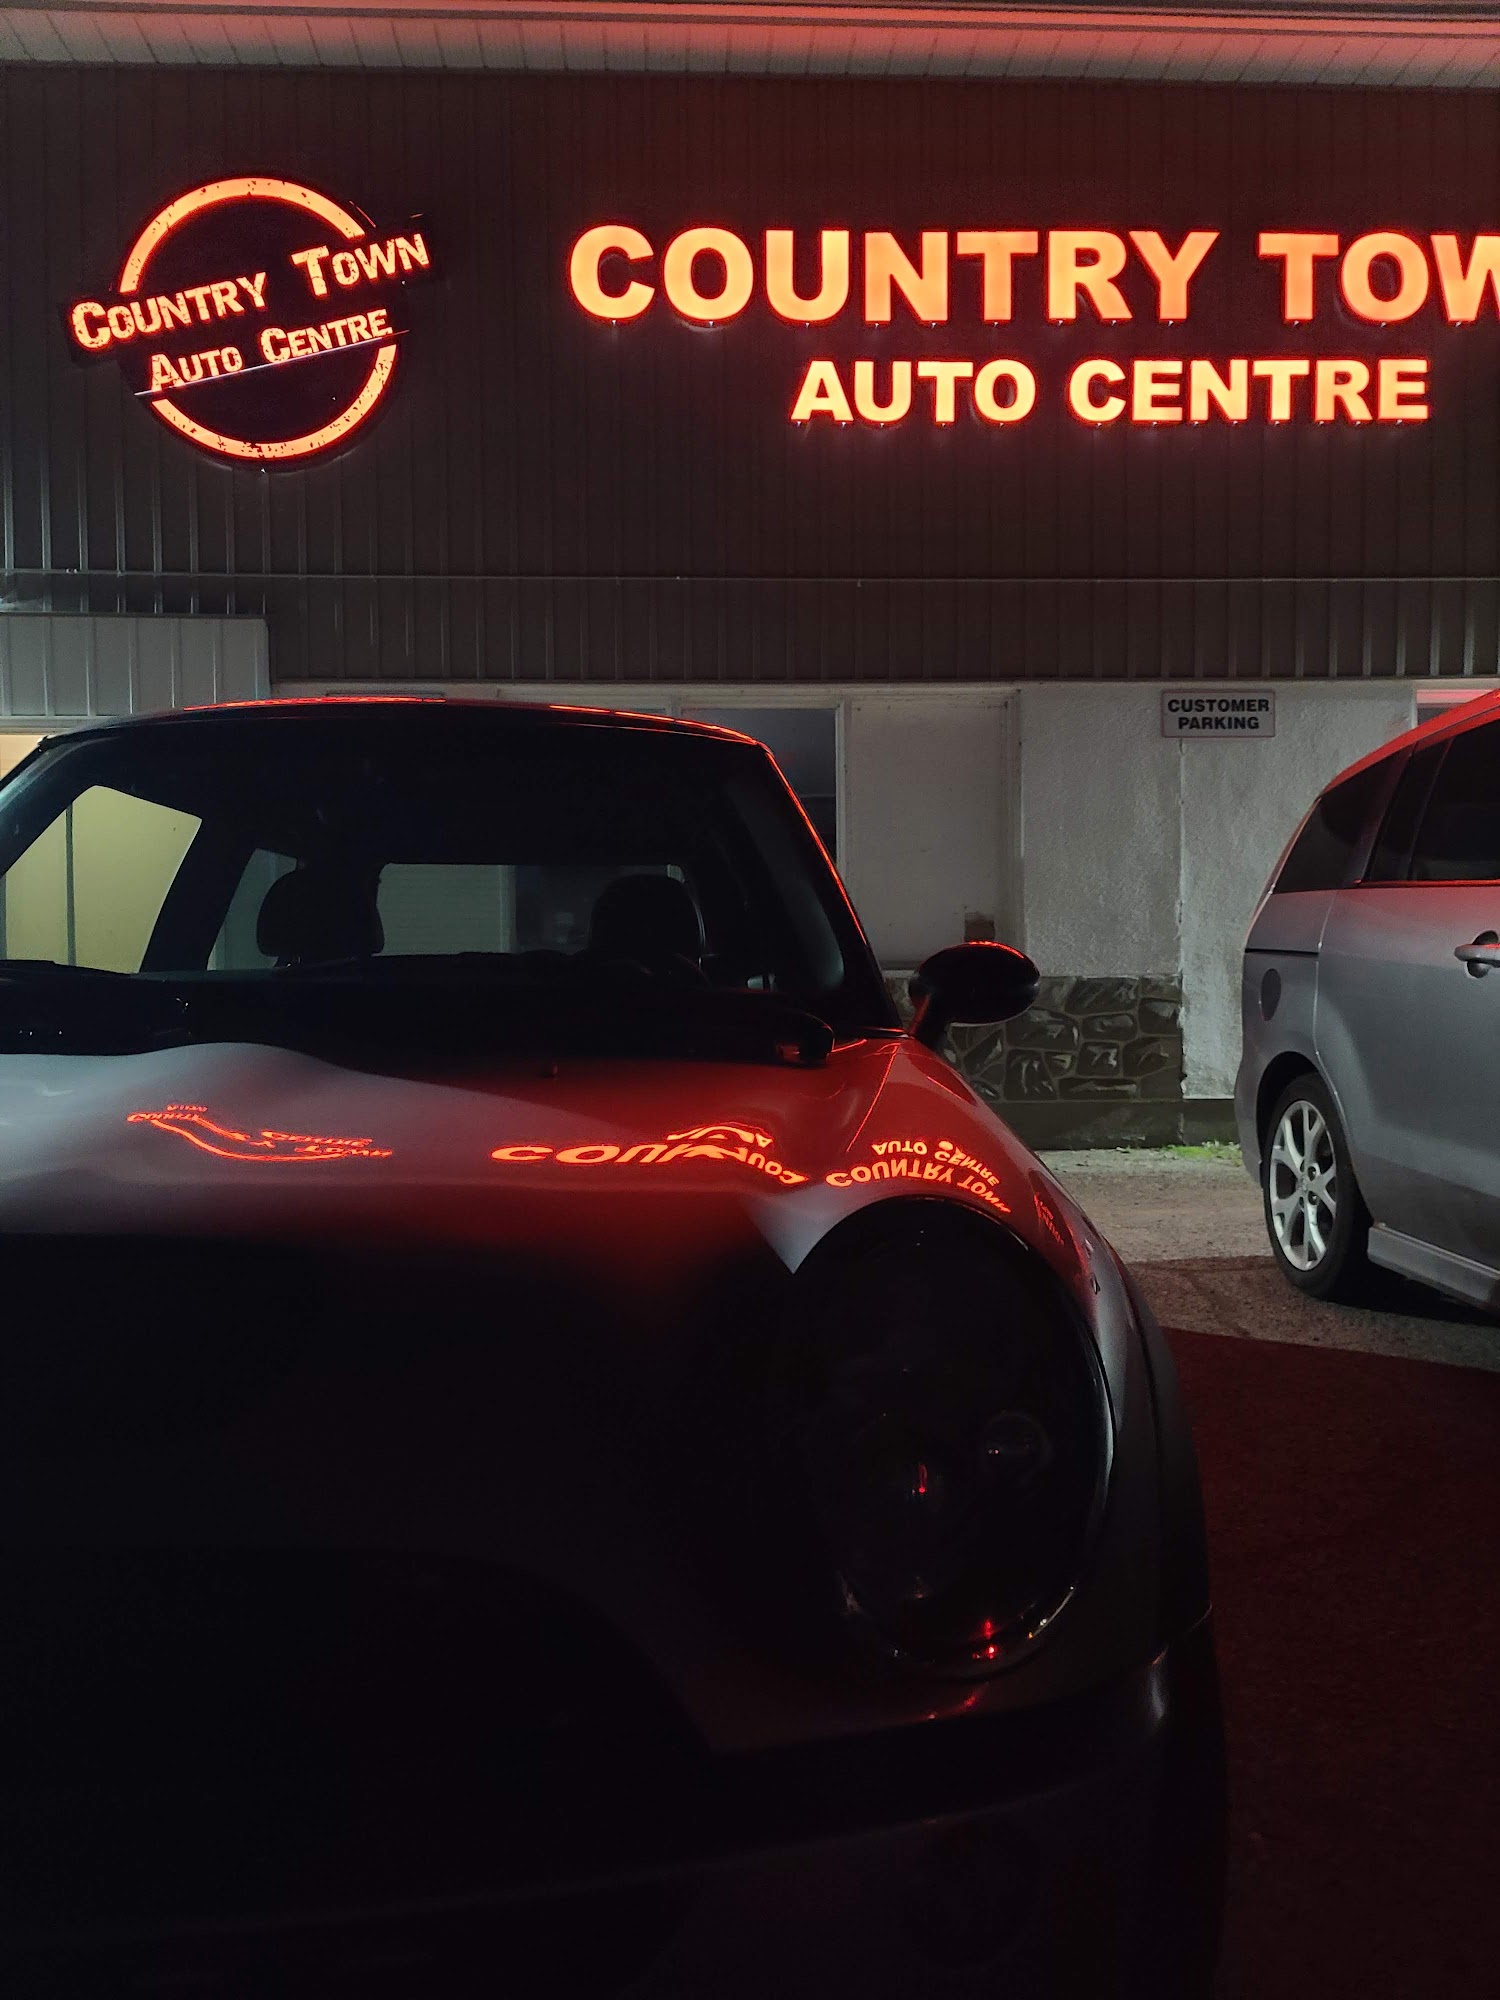 Country Town Auto Centre